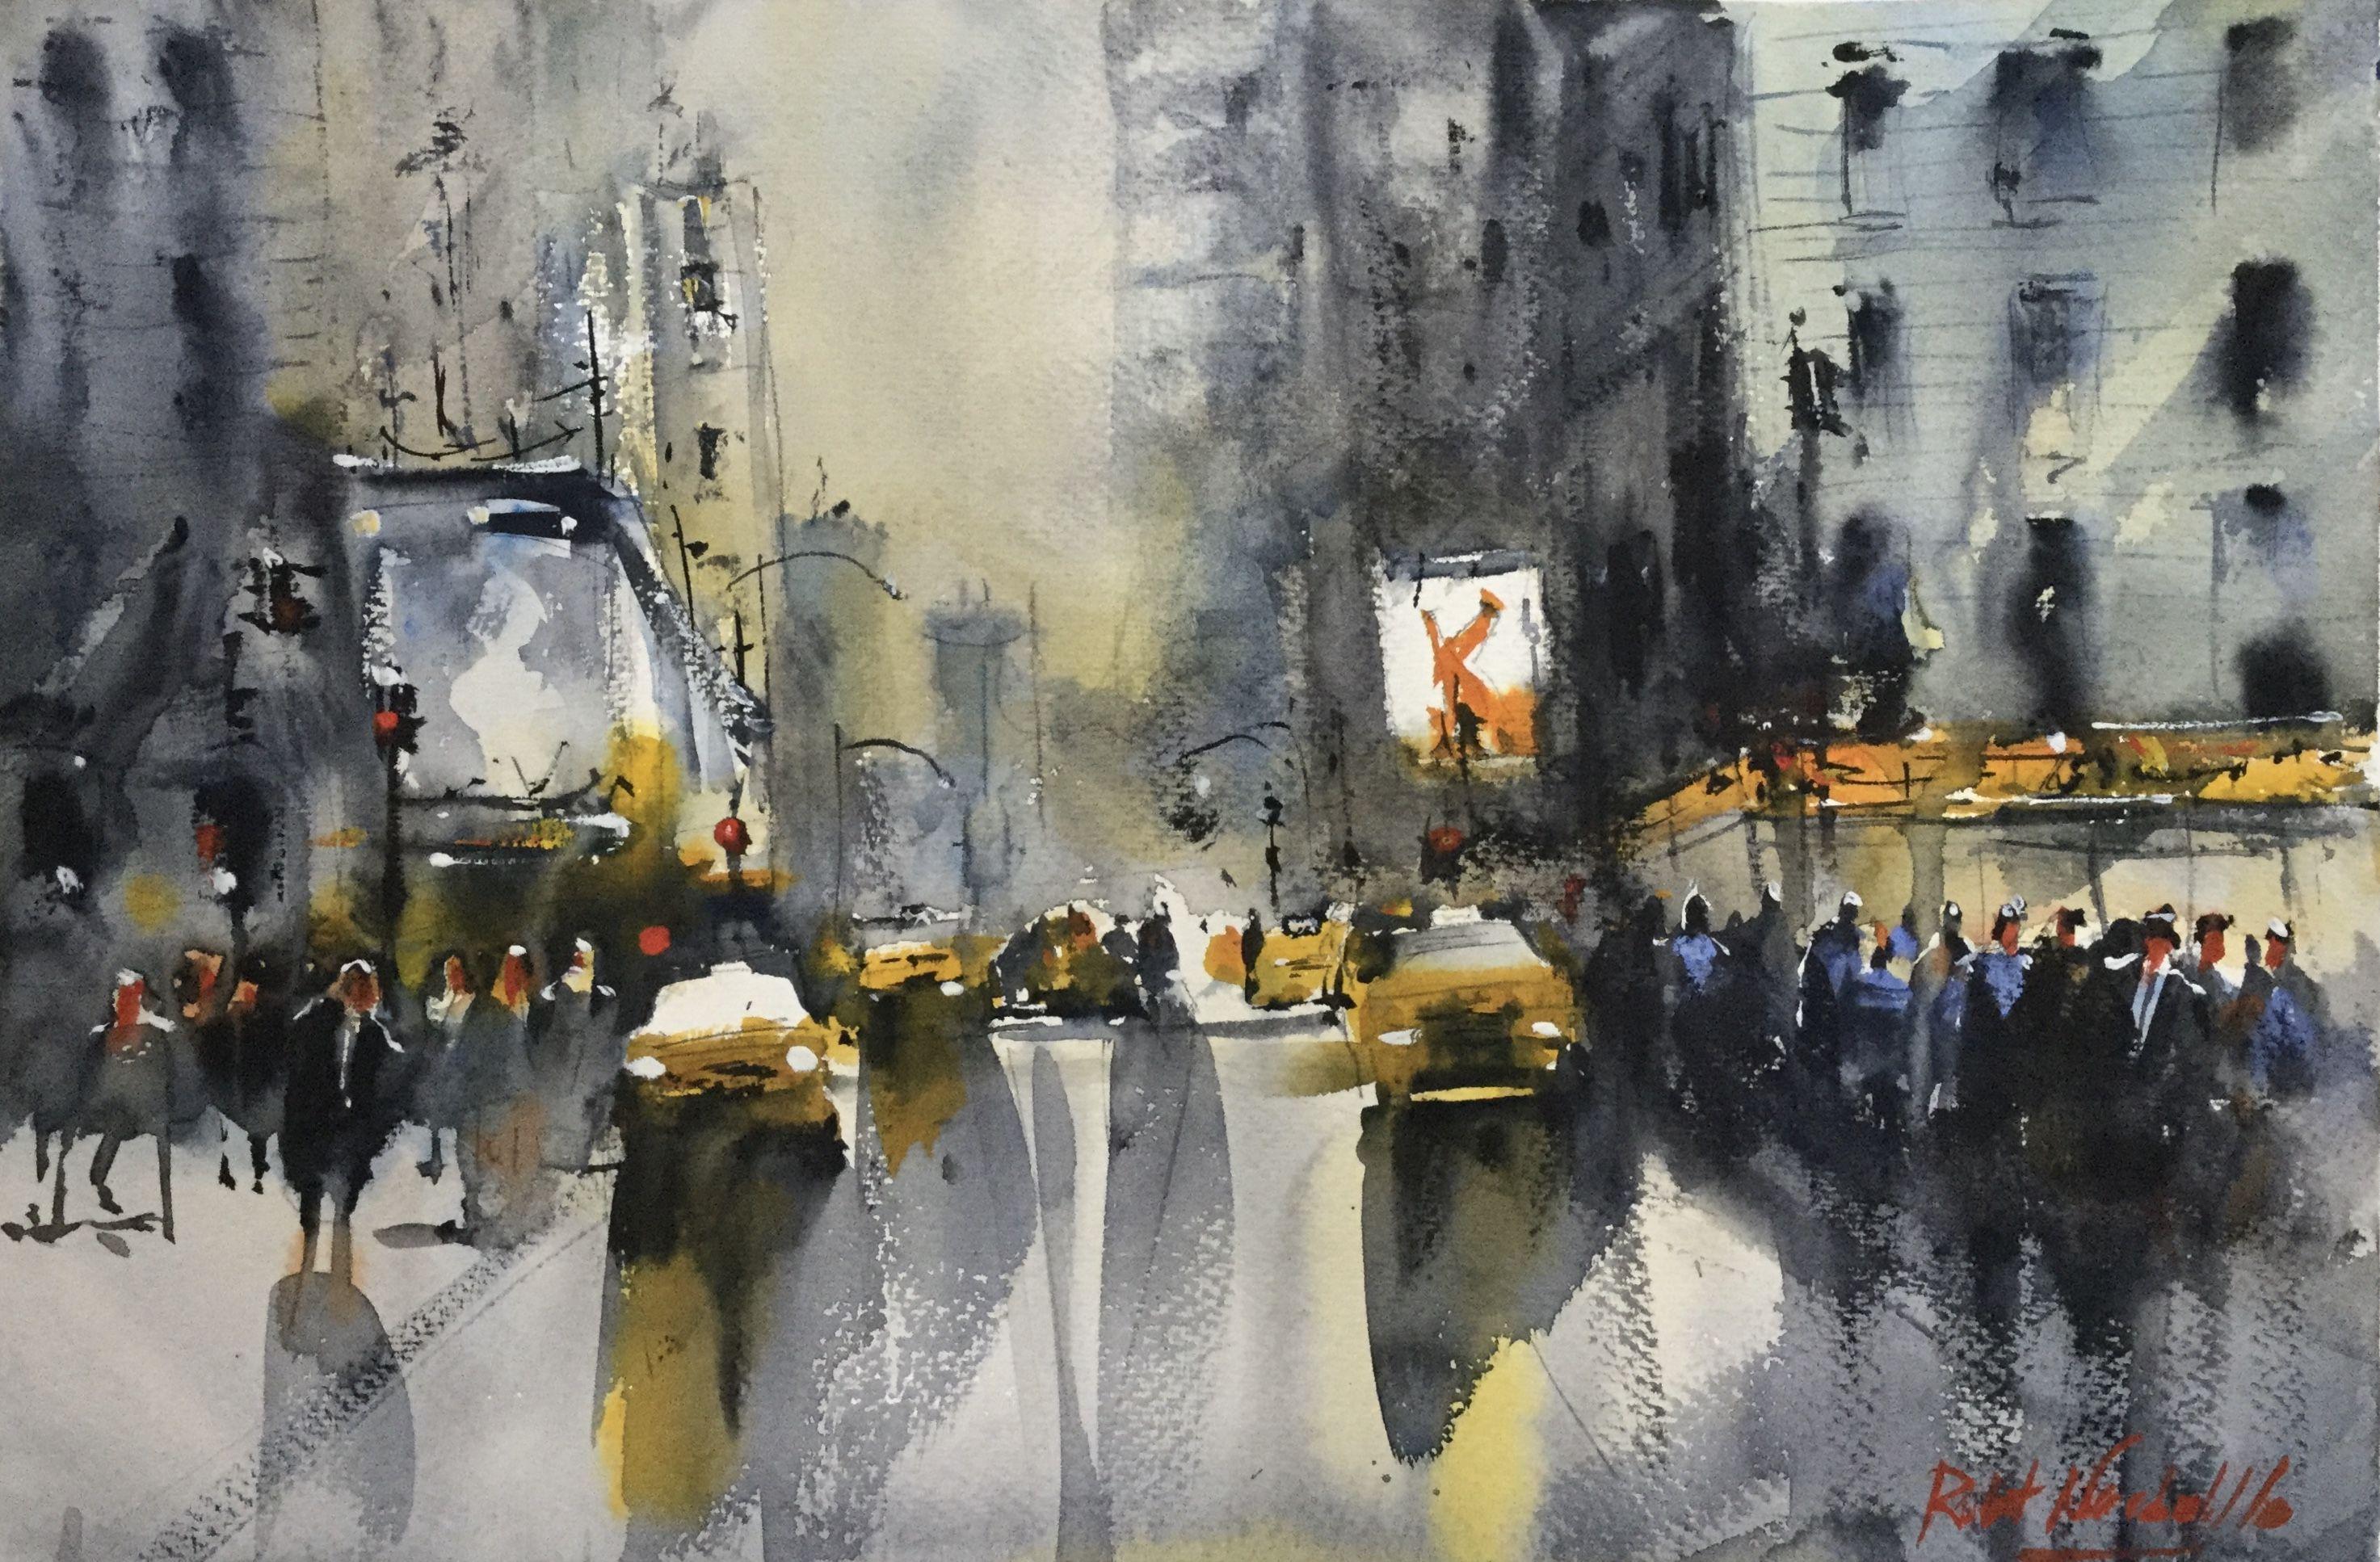 Times Square, Painting, Watercolor on Watercolor Paper - Art by Robert Nardolillo